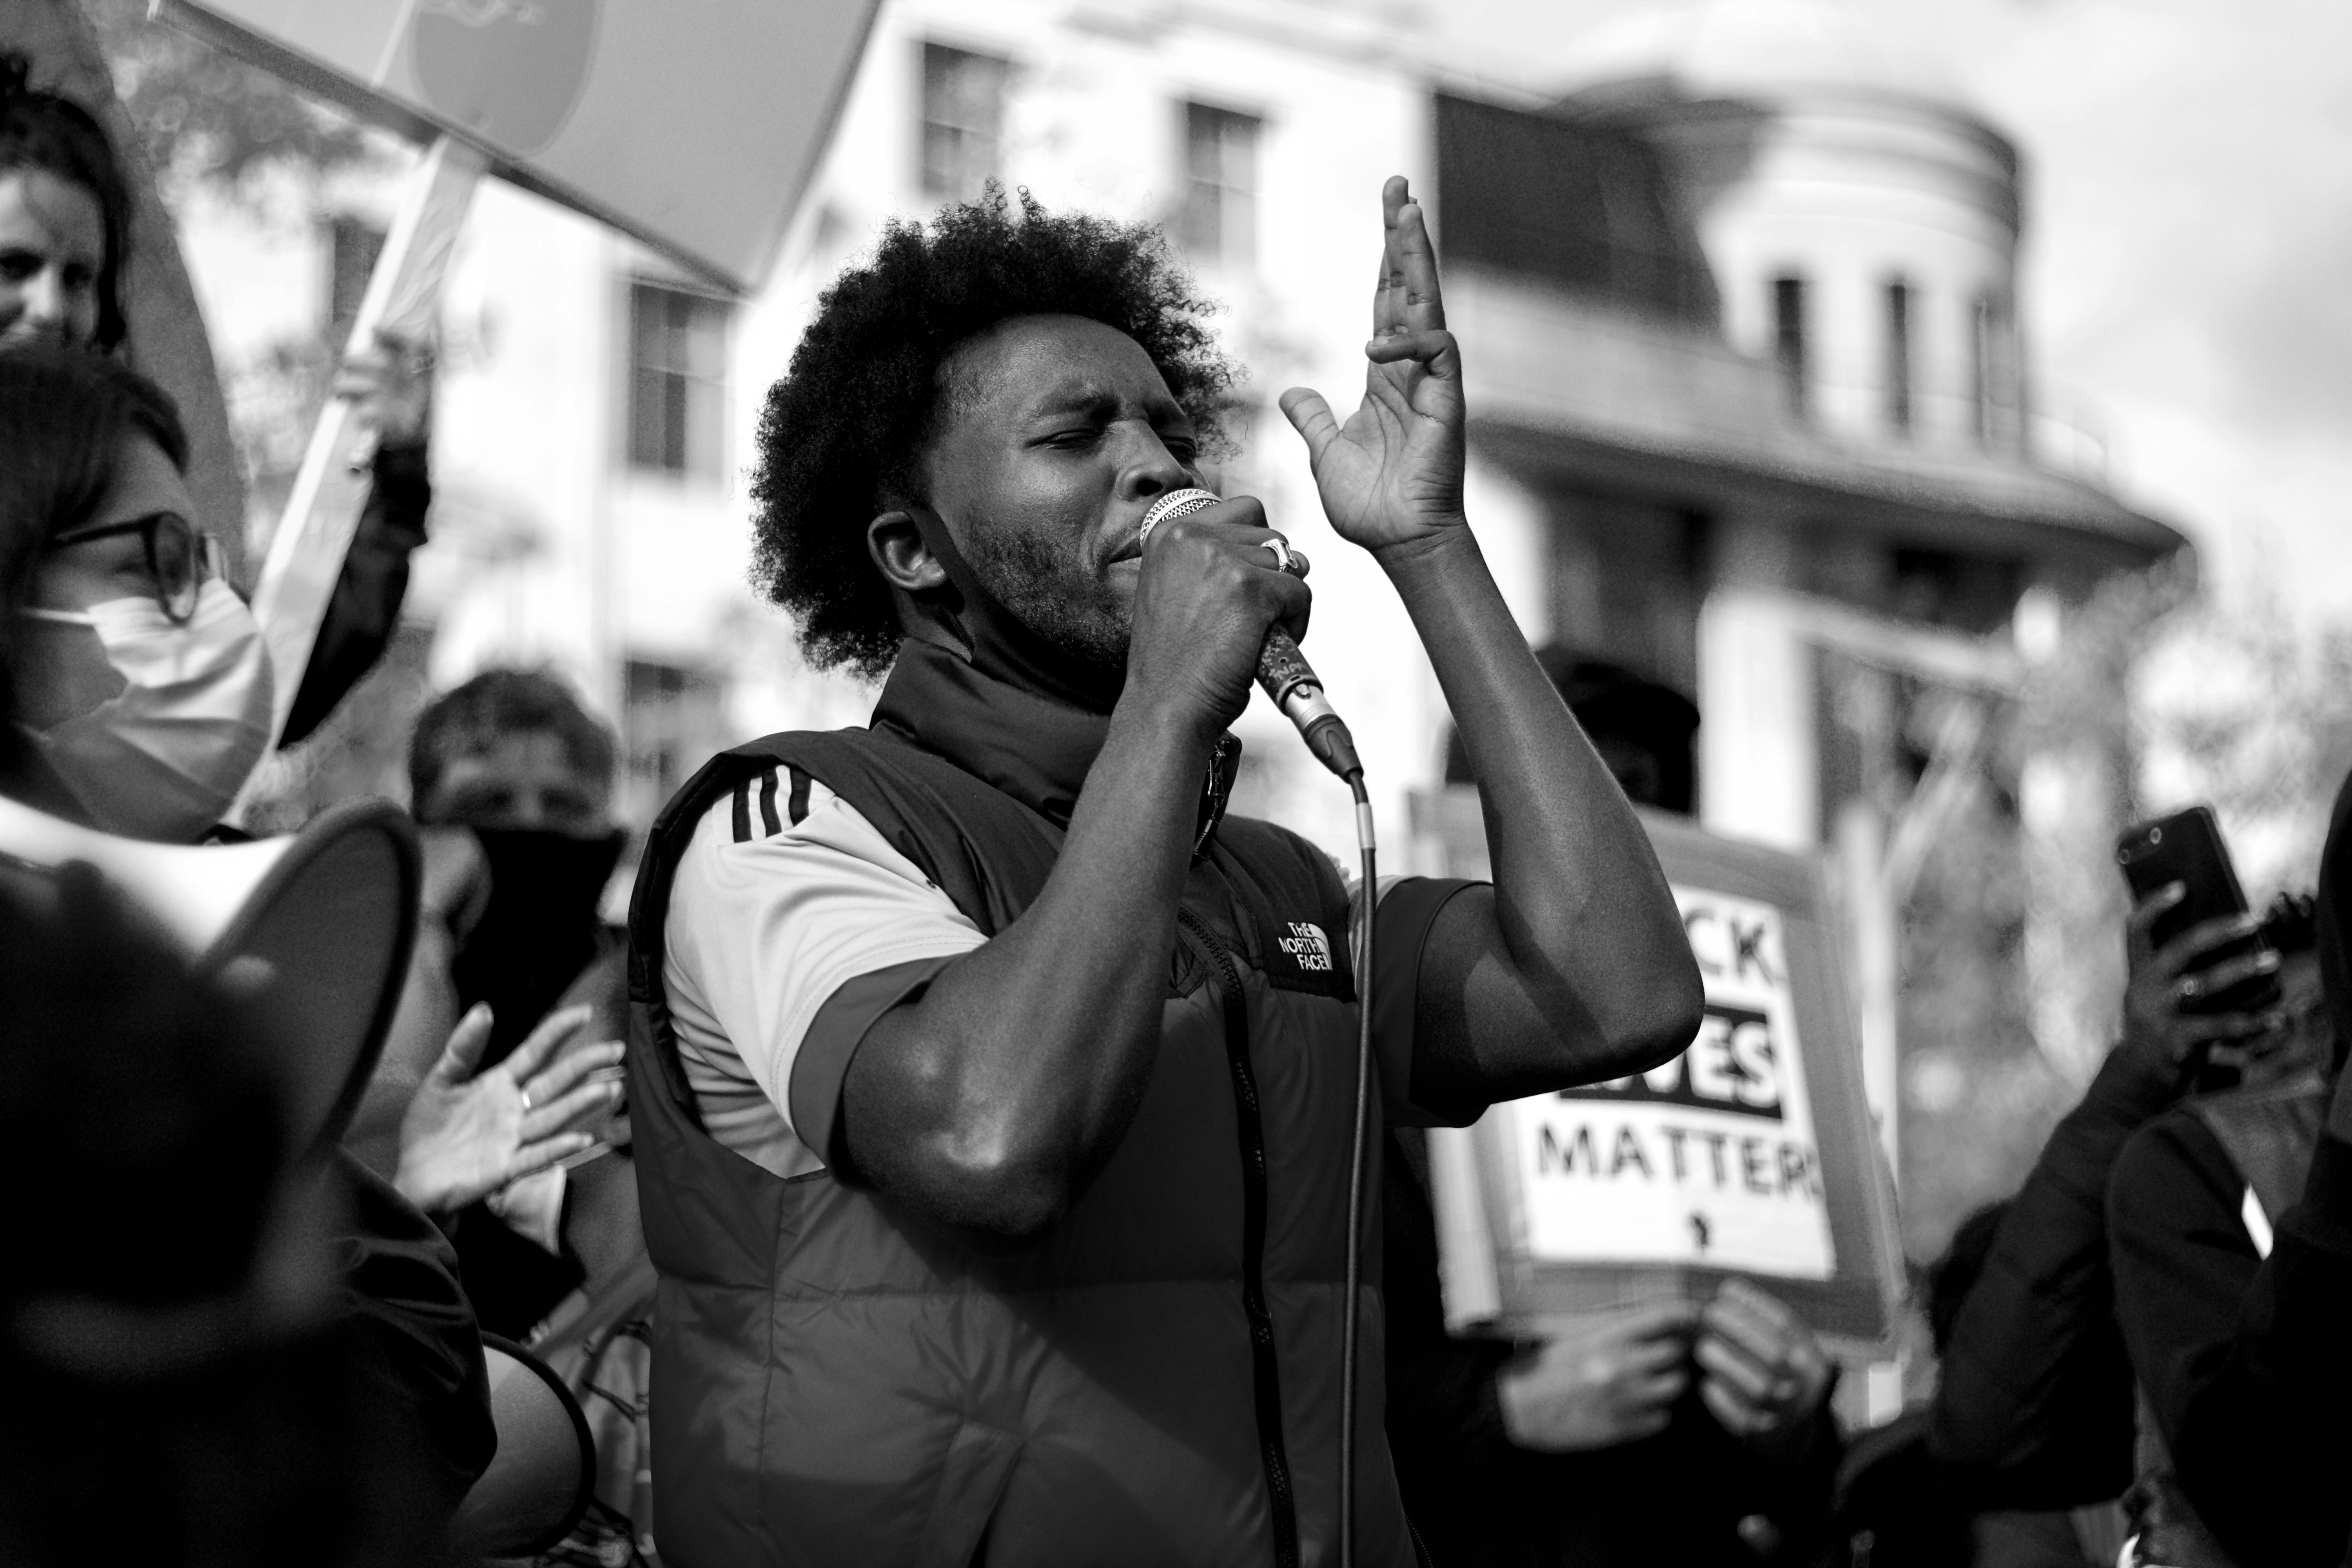 The people of Manchester break lockdown to join the global Black Lives Matter protests.

https://unsplash.com/photos/man-in-black-and-white-crew-neck-t-shirt-g8yJjfQrOJA